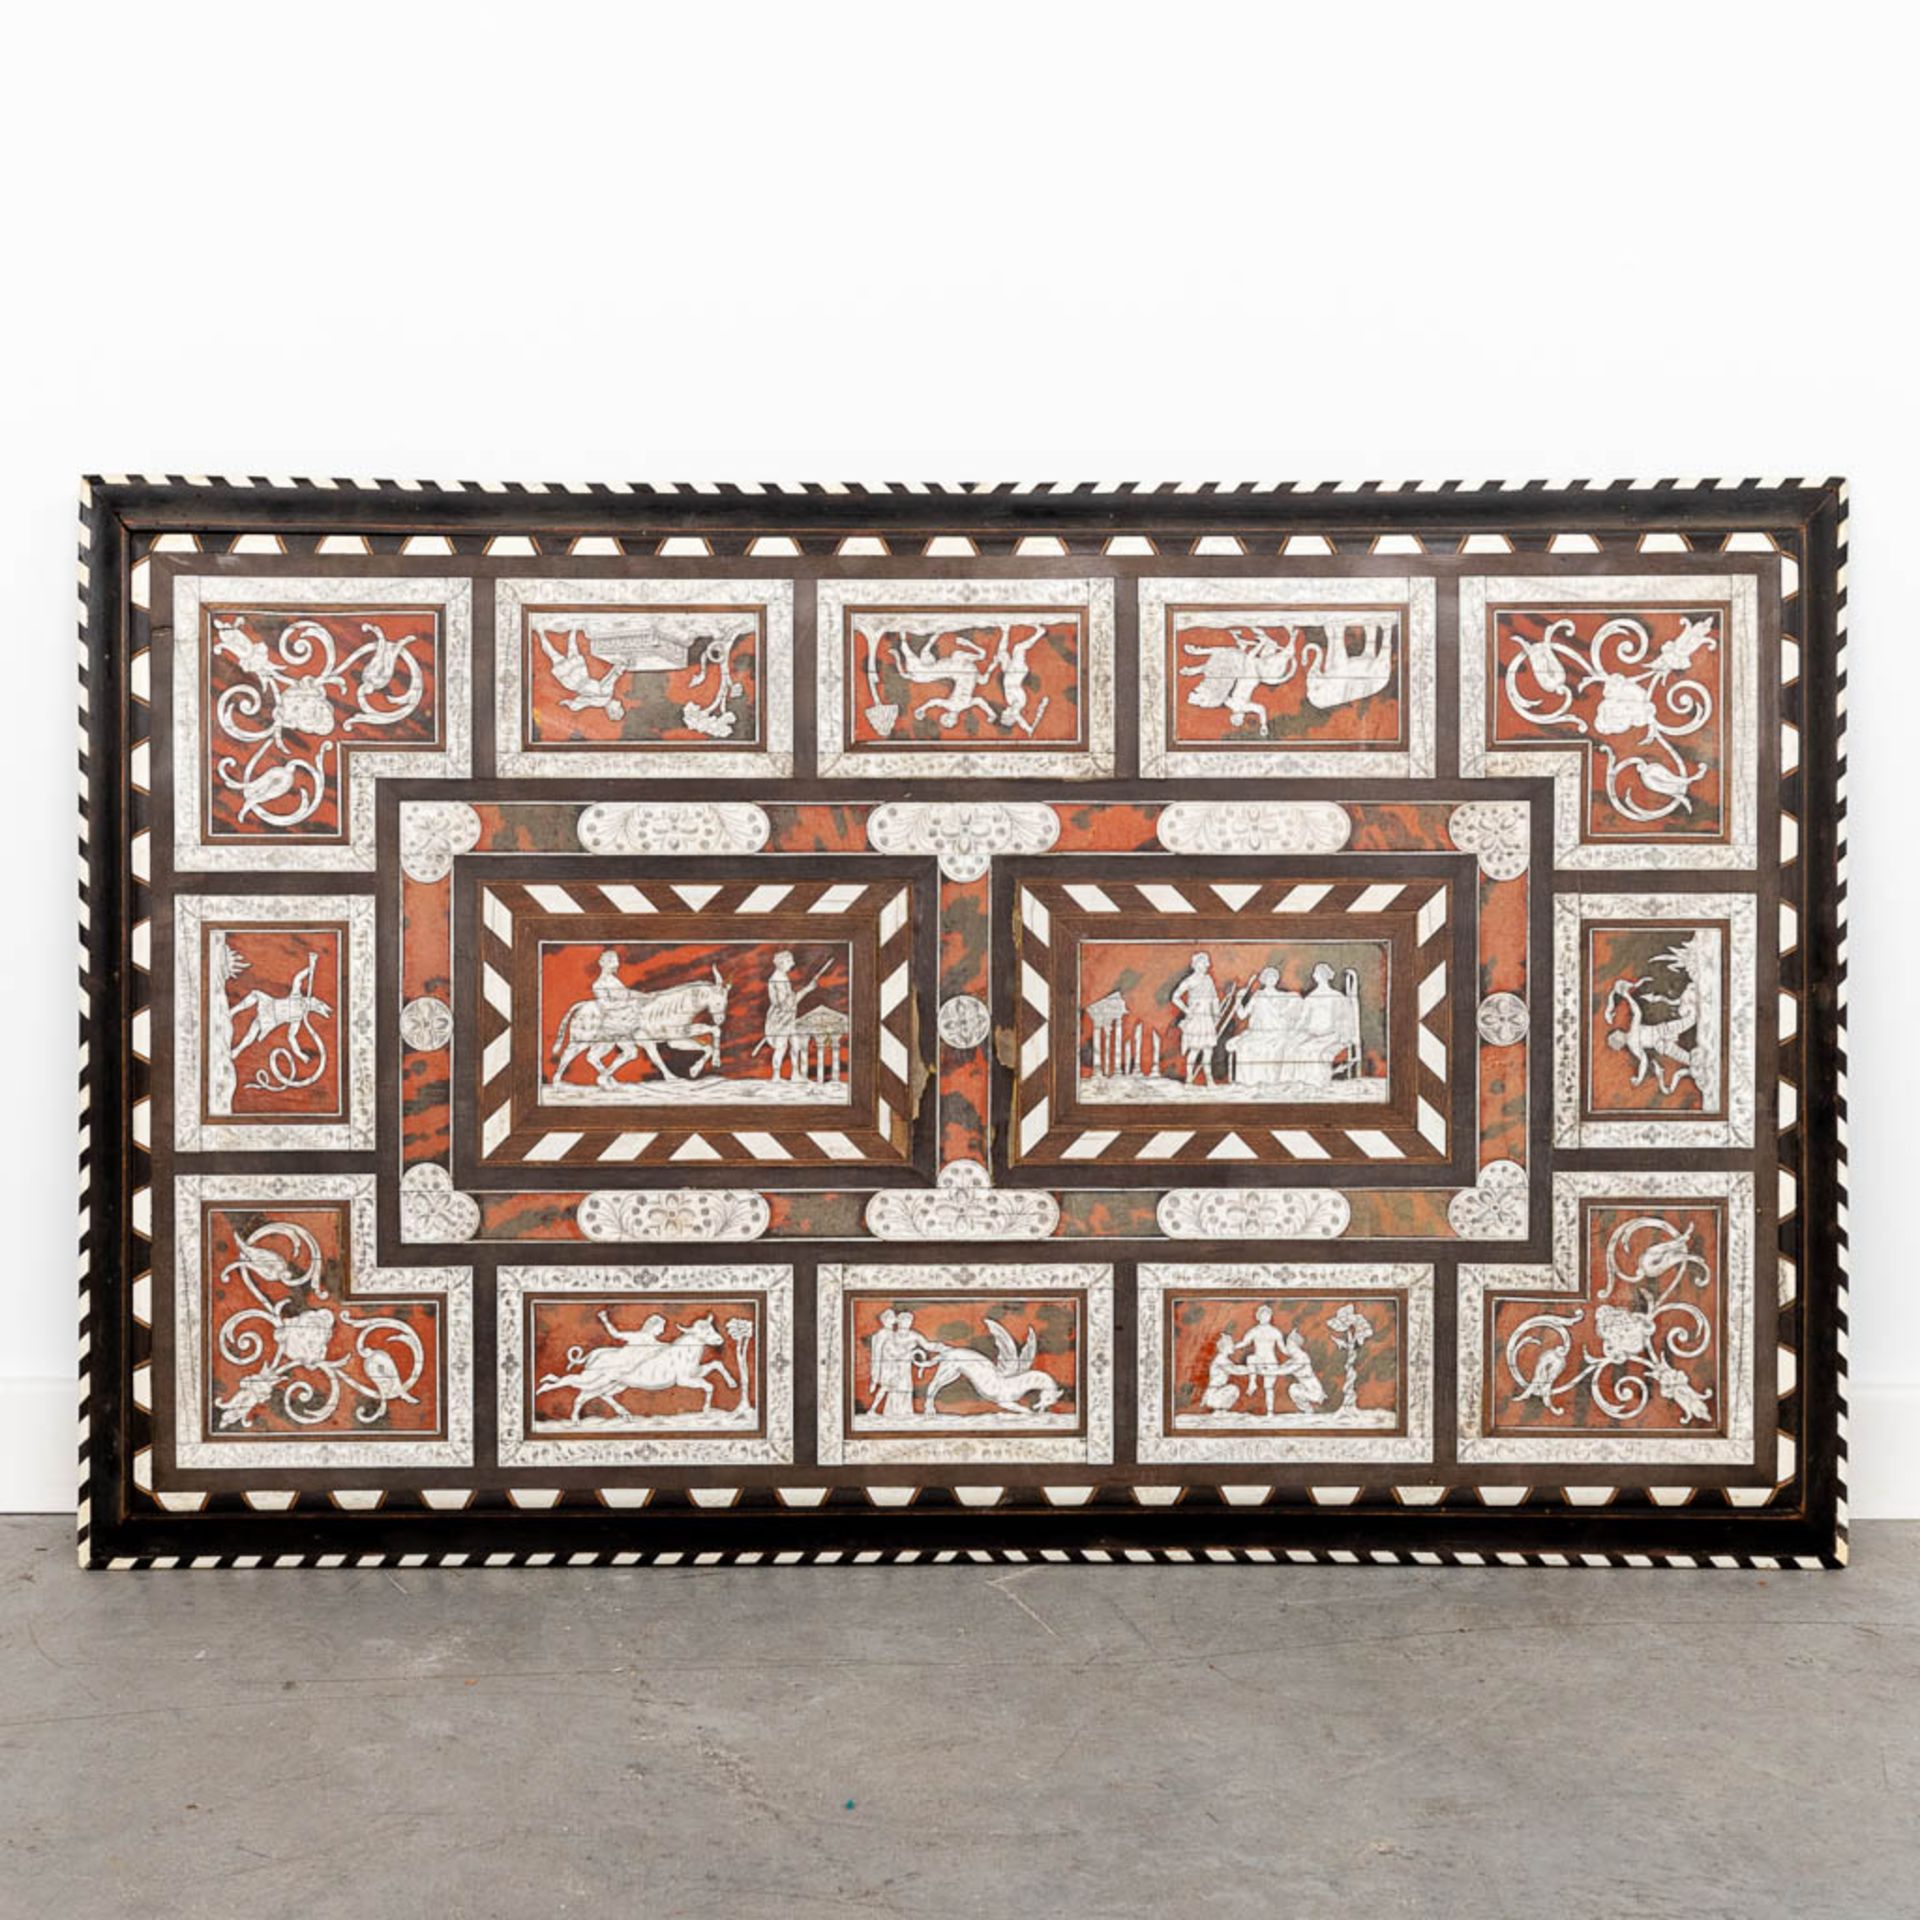 An antique tabletop, with marquetry inlay of bone and tortoiseshell. 18th C. (W:85 x H:25 cm) - Image 3 of 12